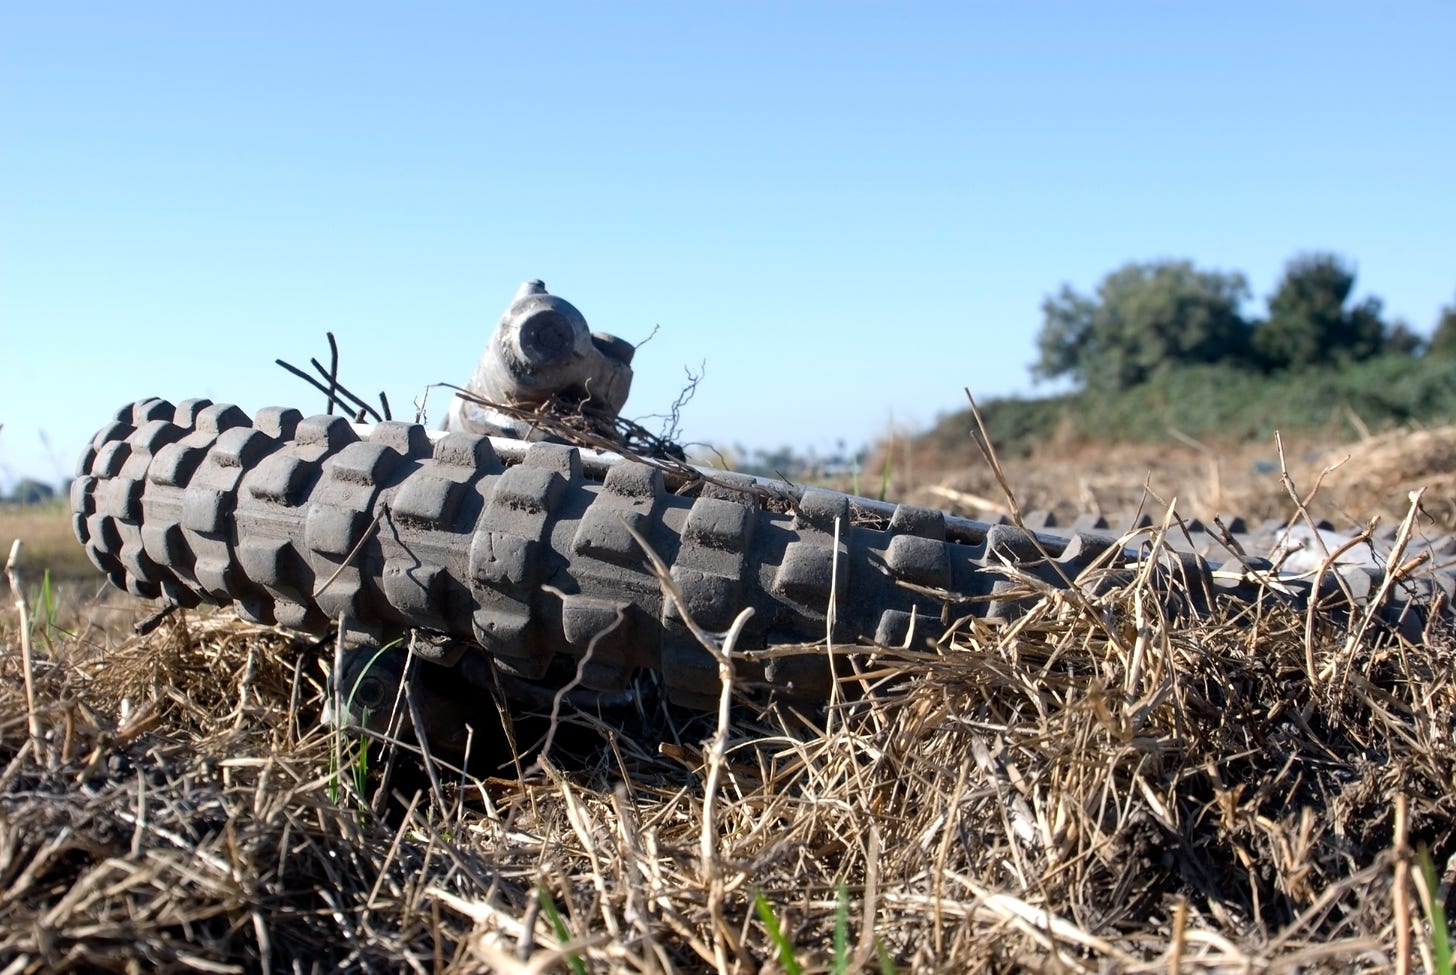 Wheel and muffler of a motocross motorcycle sitting in dry grass on a sunny day